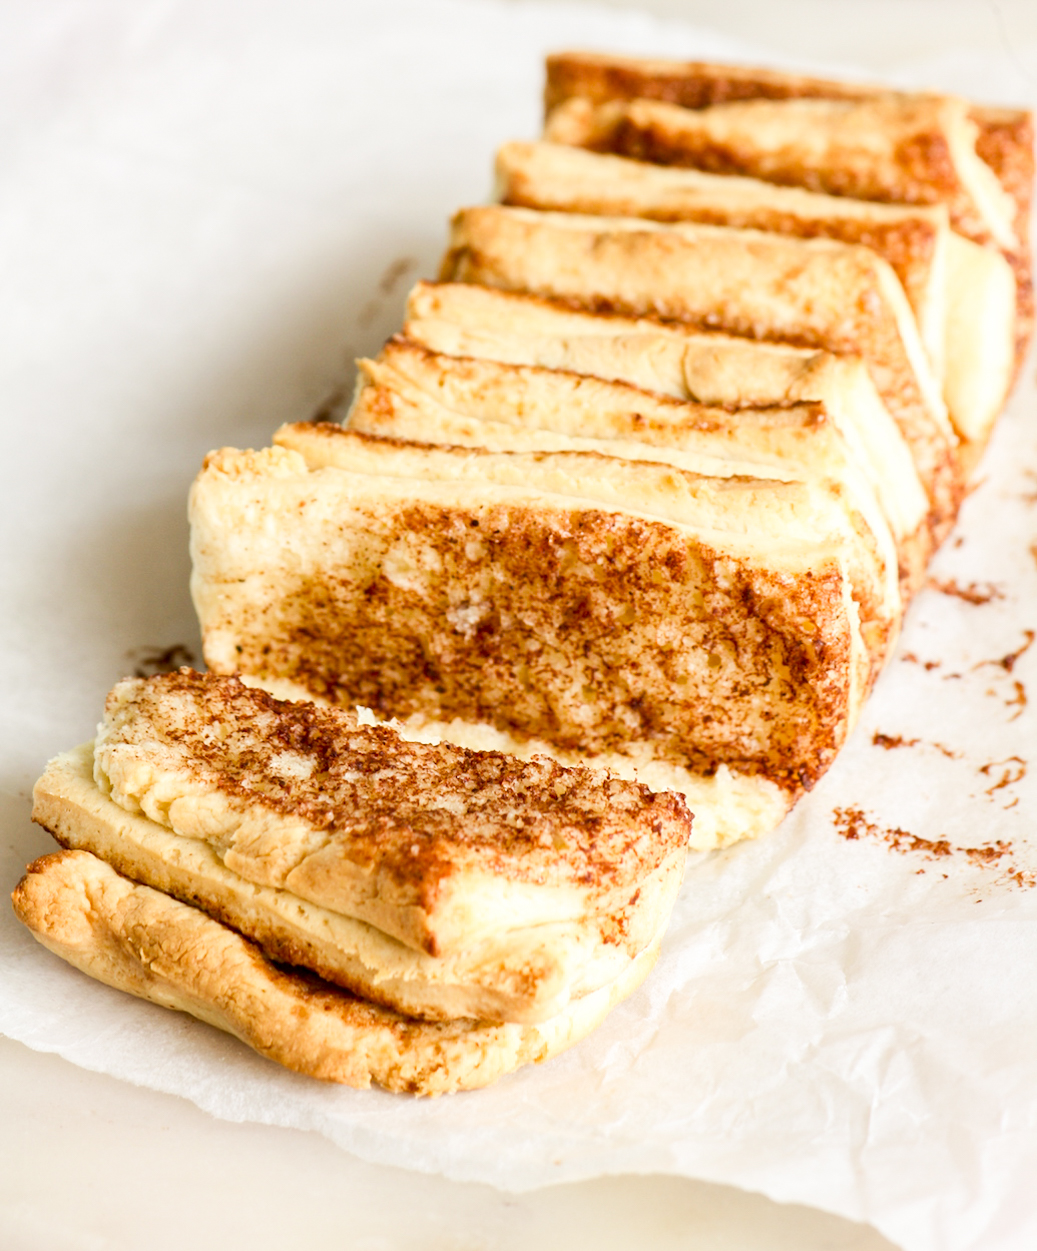 An easy, soft pull-apart mini loaf of bread with cinnamon sugar filling